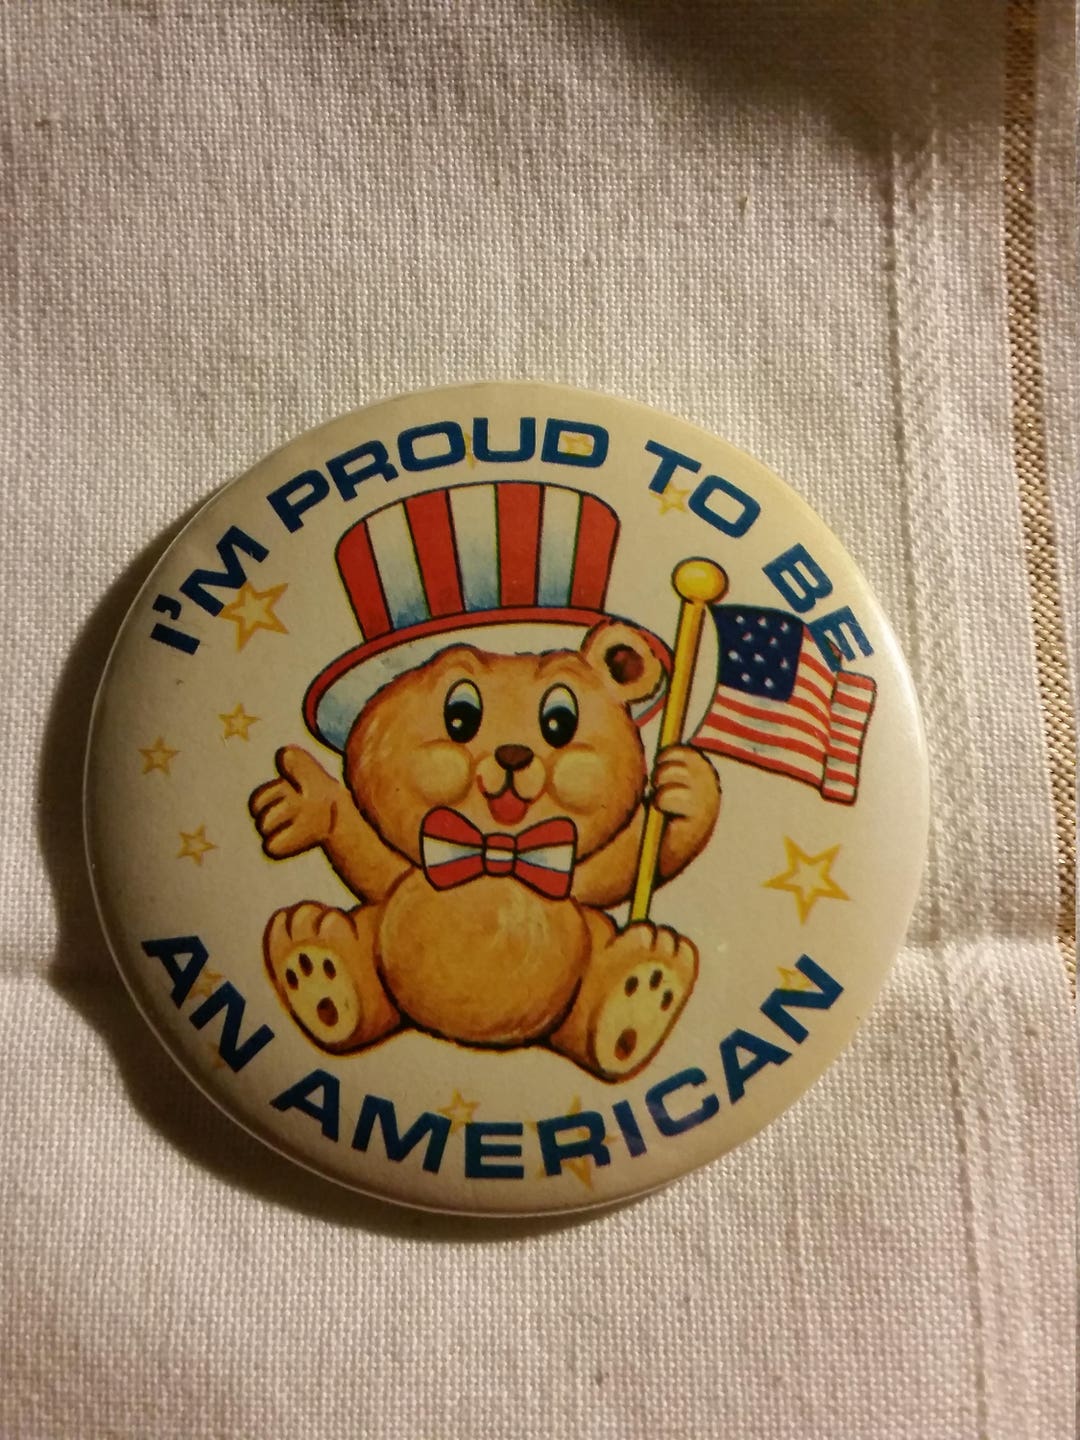 I'm Proud to Be an American Vintage Button